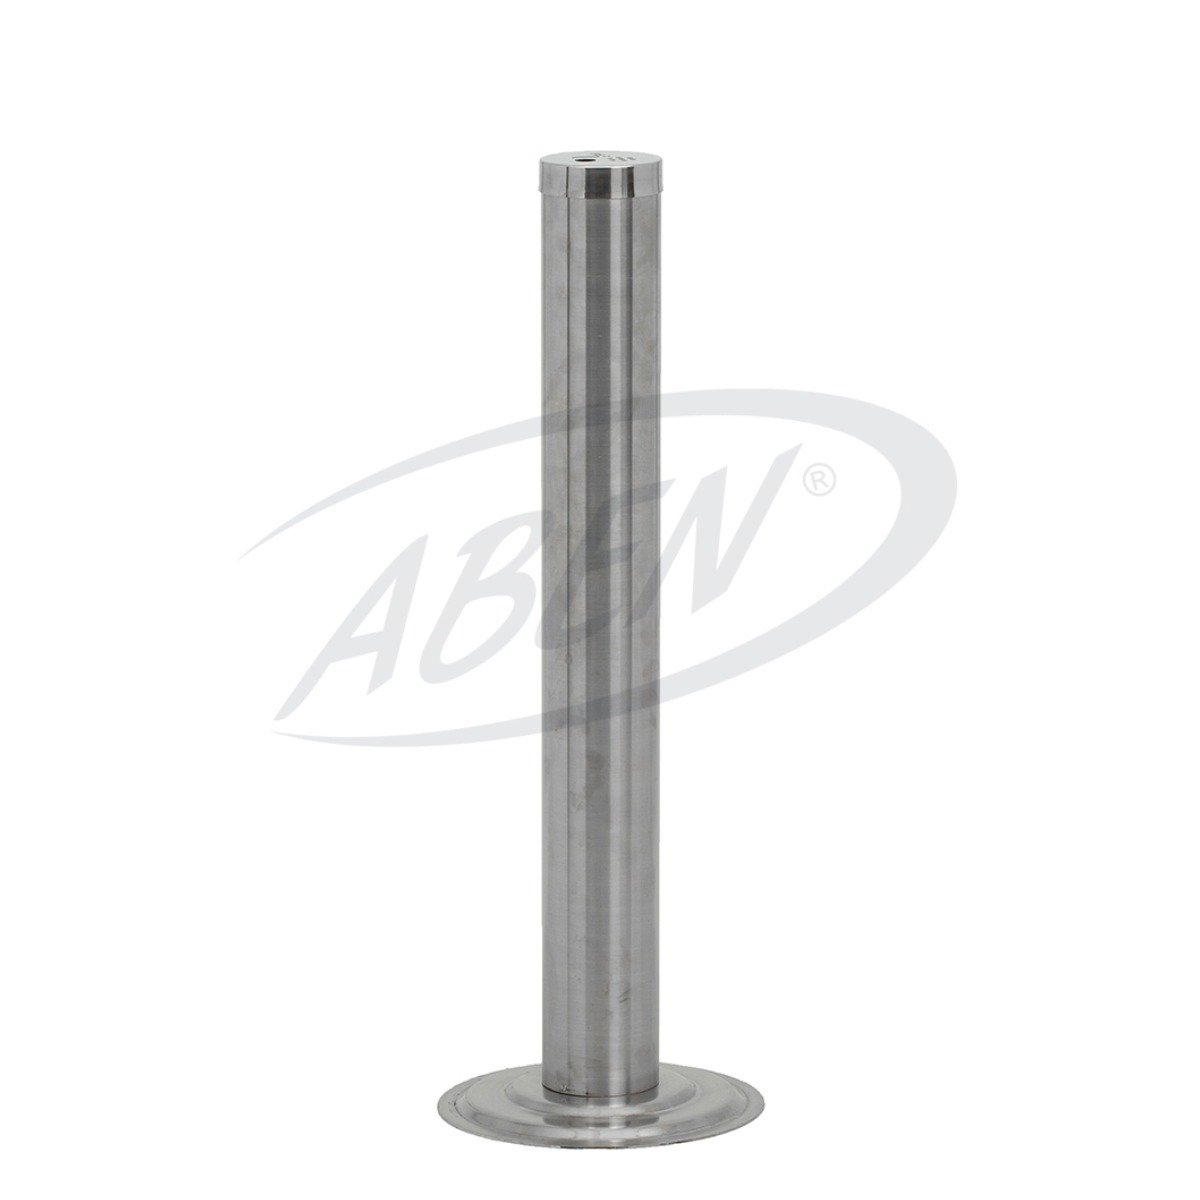 AB-104 Outdoor Ashtray Stainless